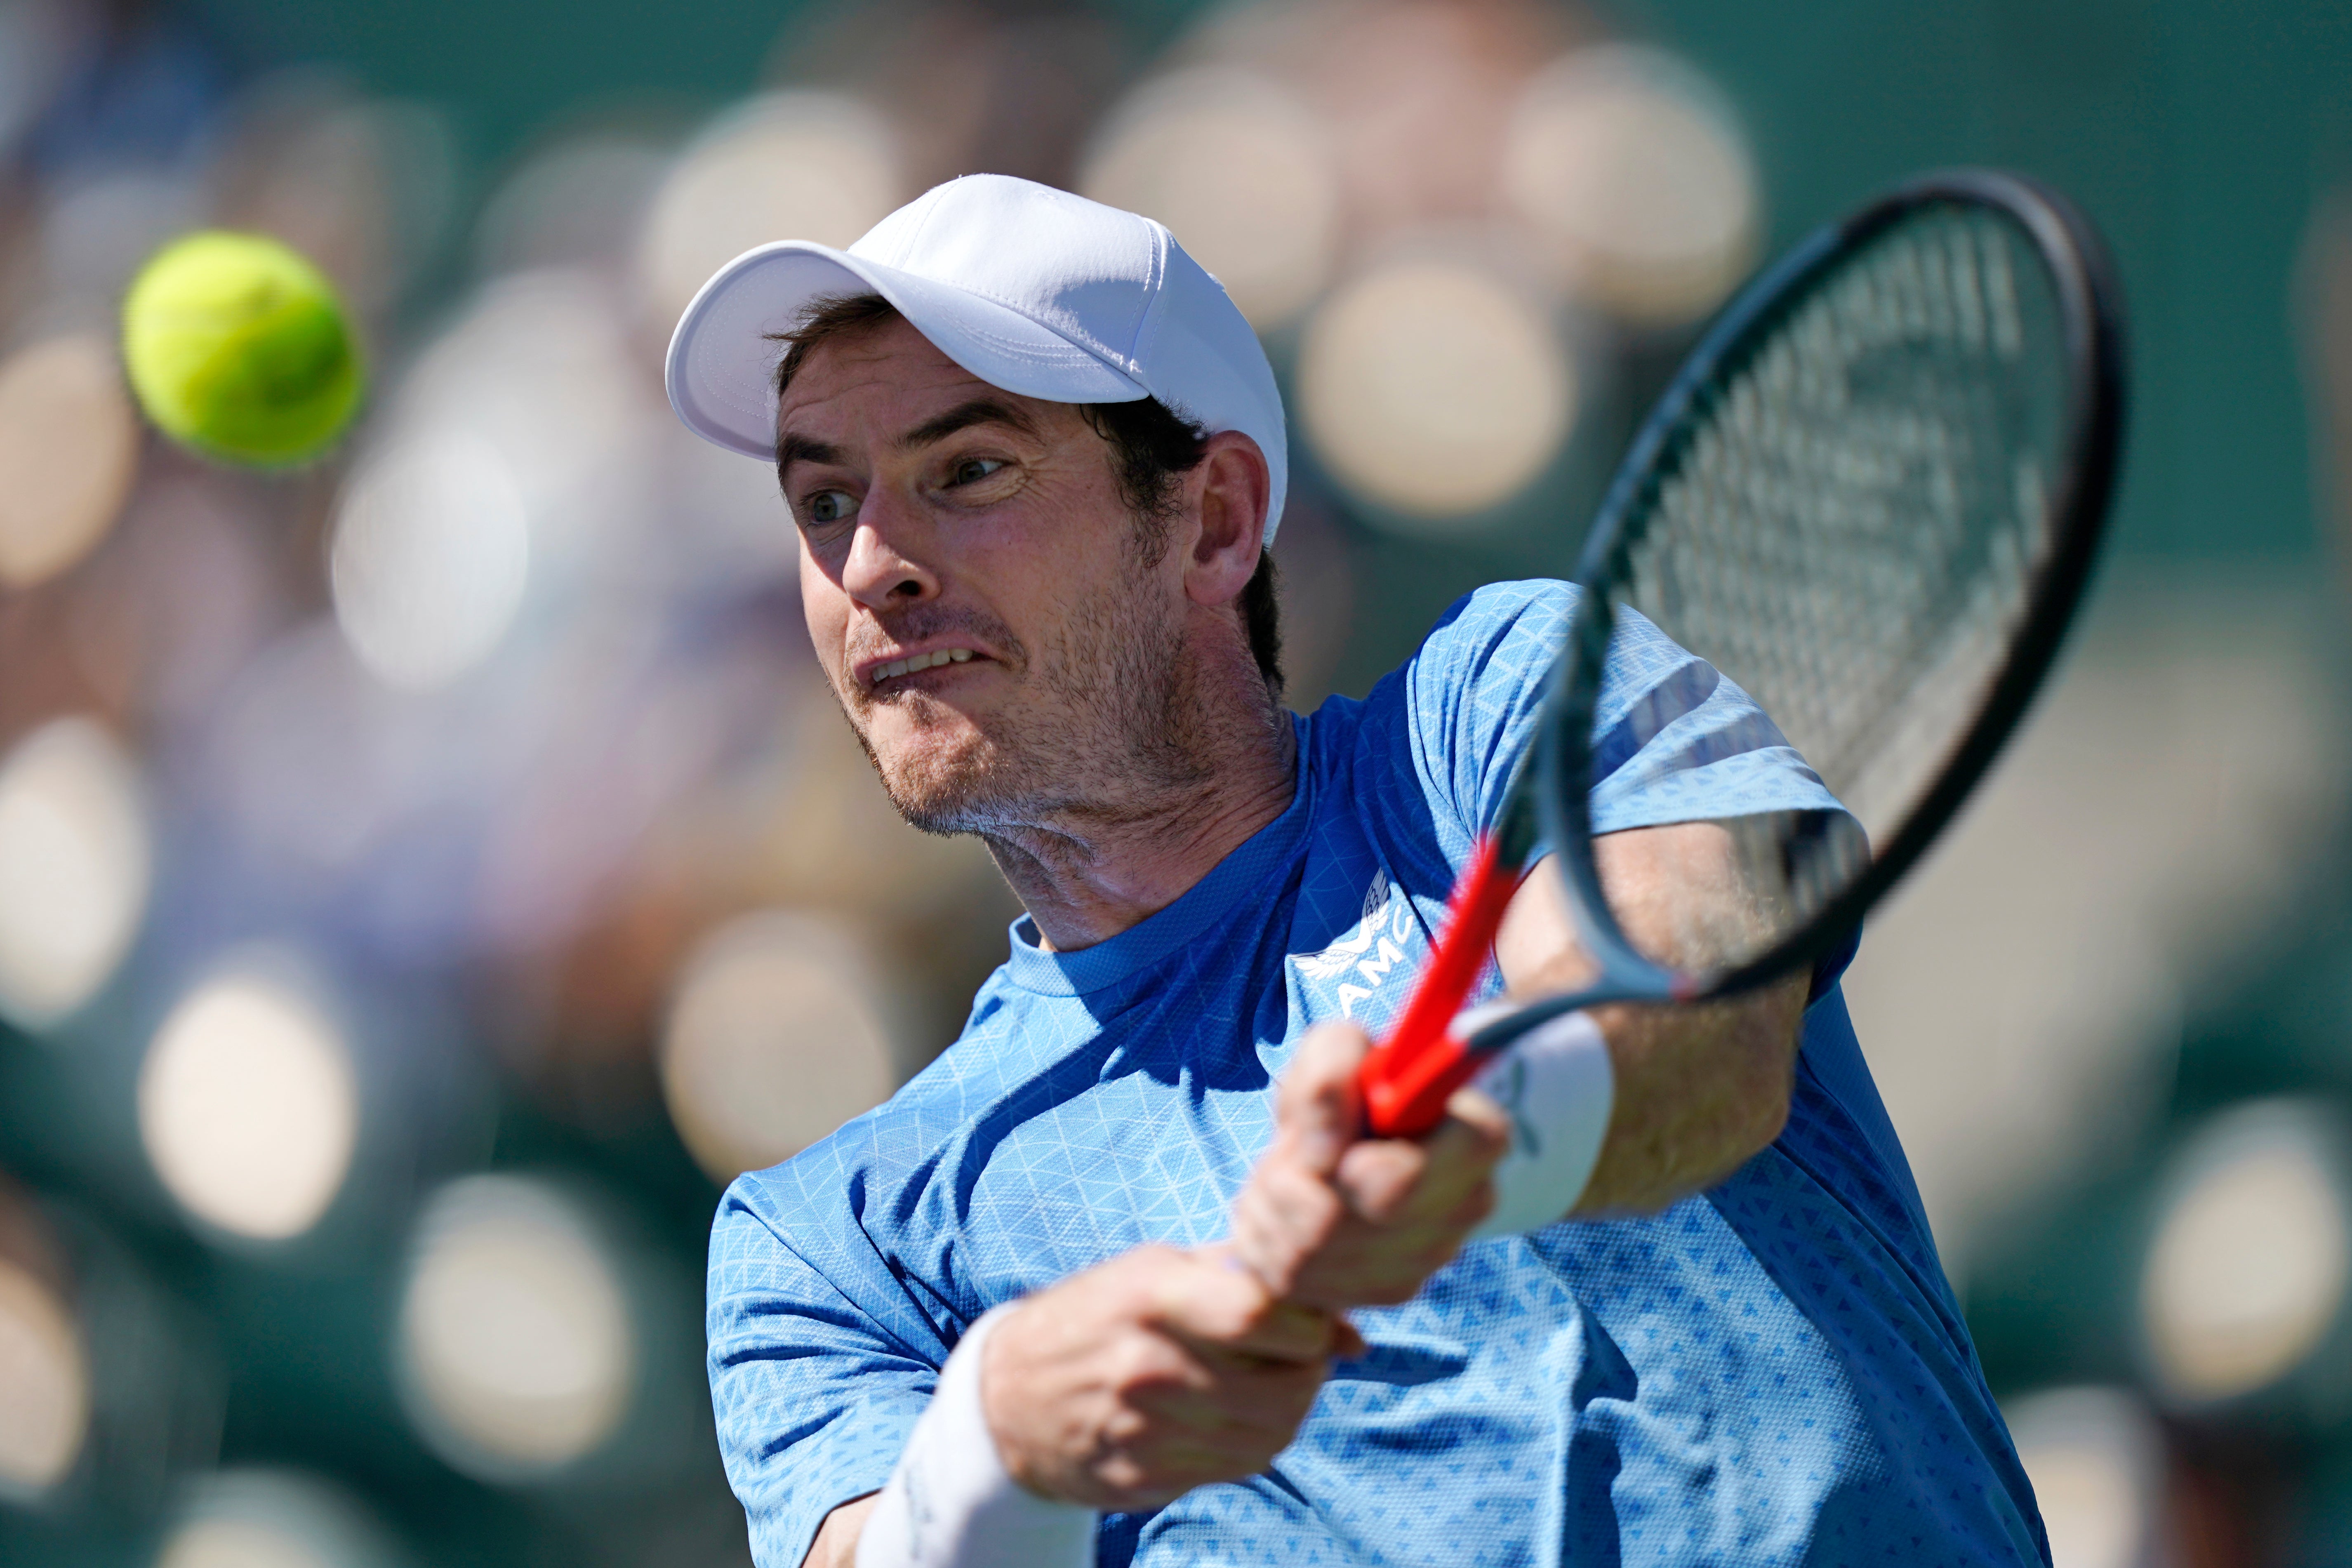 Andy Murray battled to victory over Carlos Alcaraz at Indian Wells (Mark J. Terrill/AP)